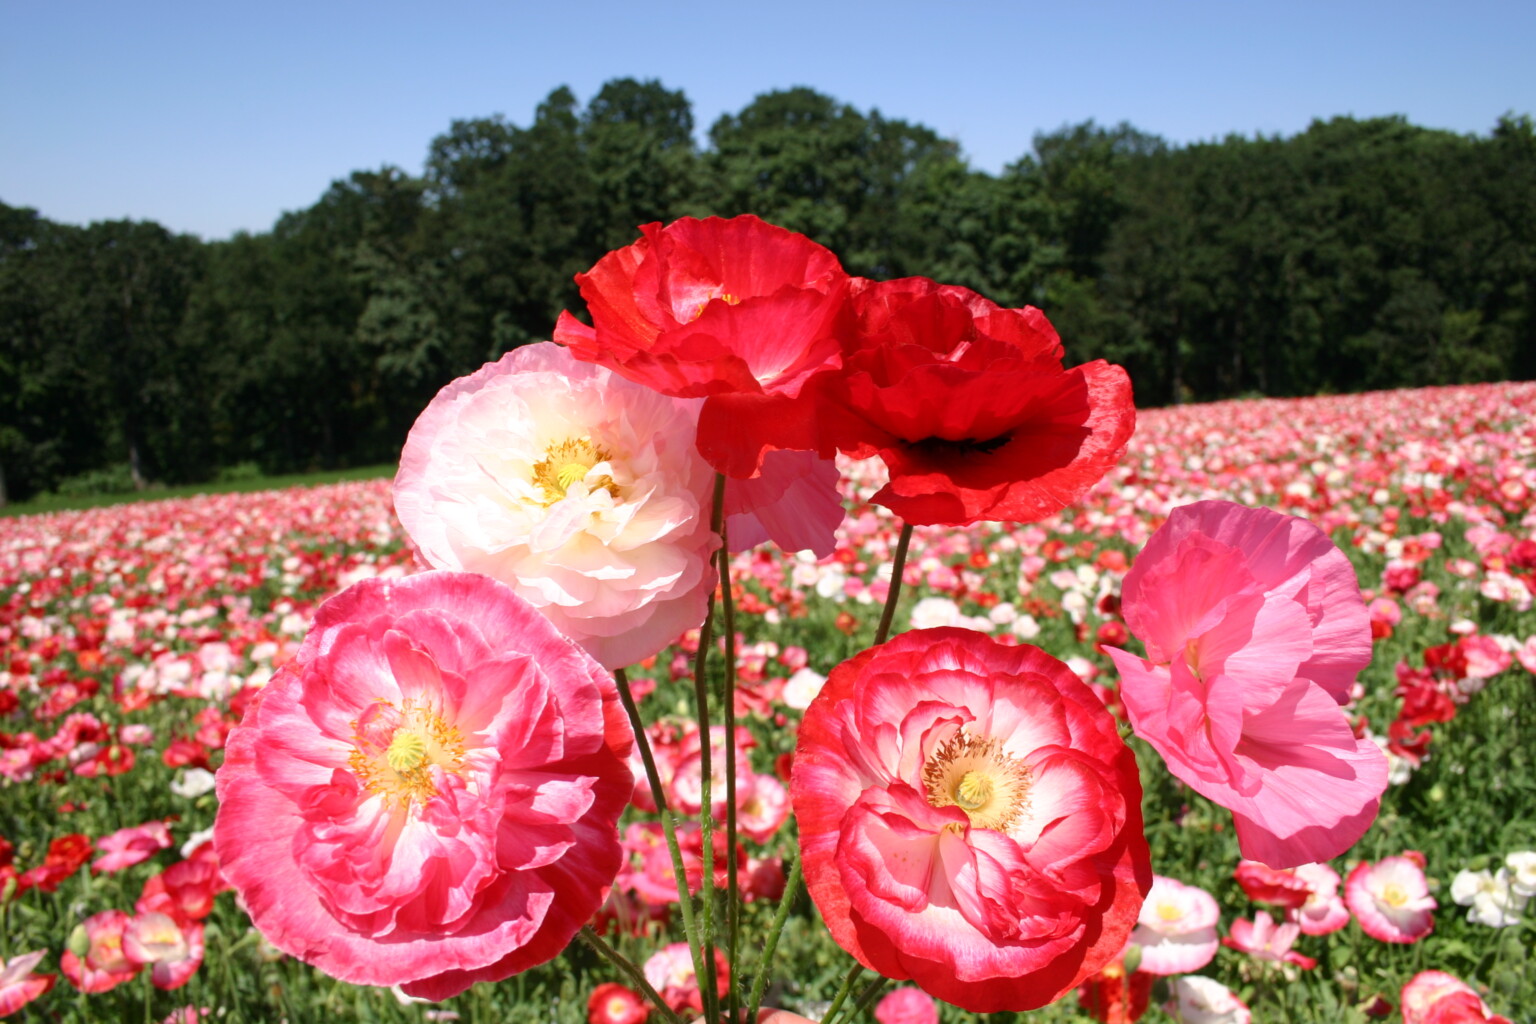 Poppy Peony Seeds - Double Mixed, Flower Seeds in Packets & Bulk